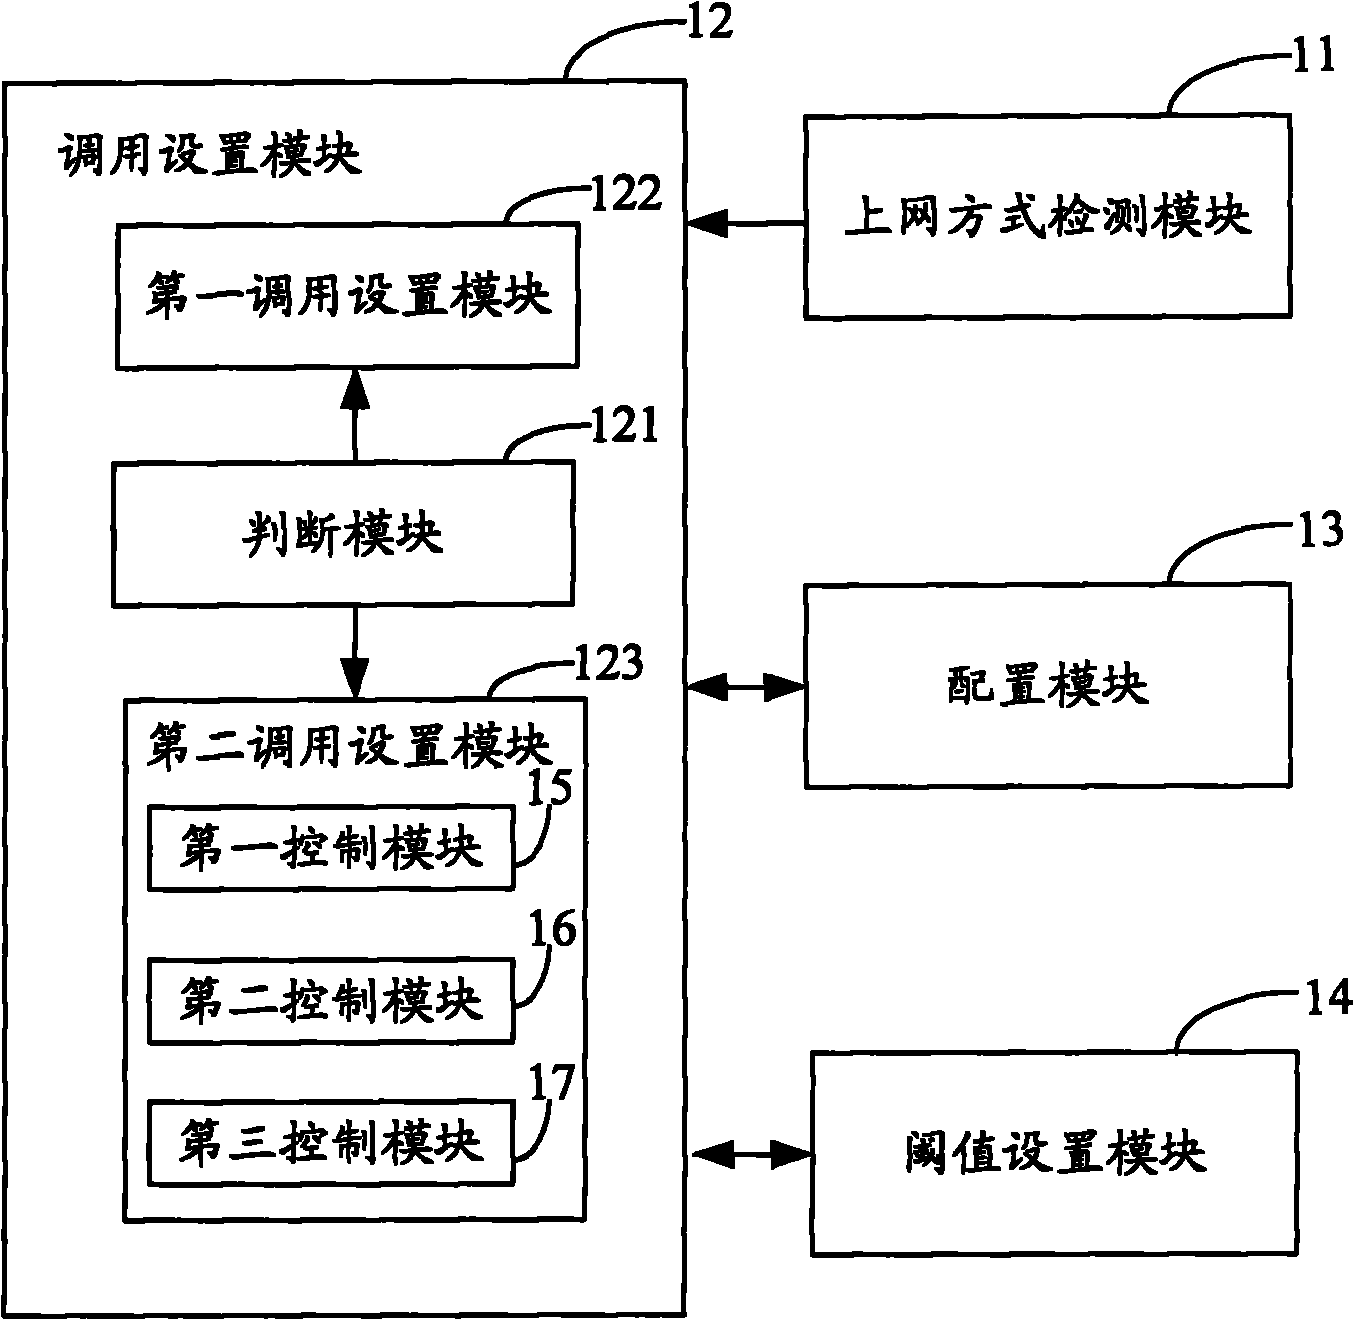 Network access control method, network access control system and network access terminal